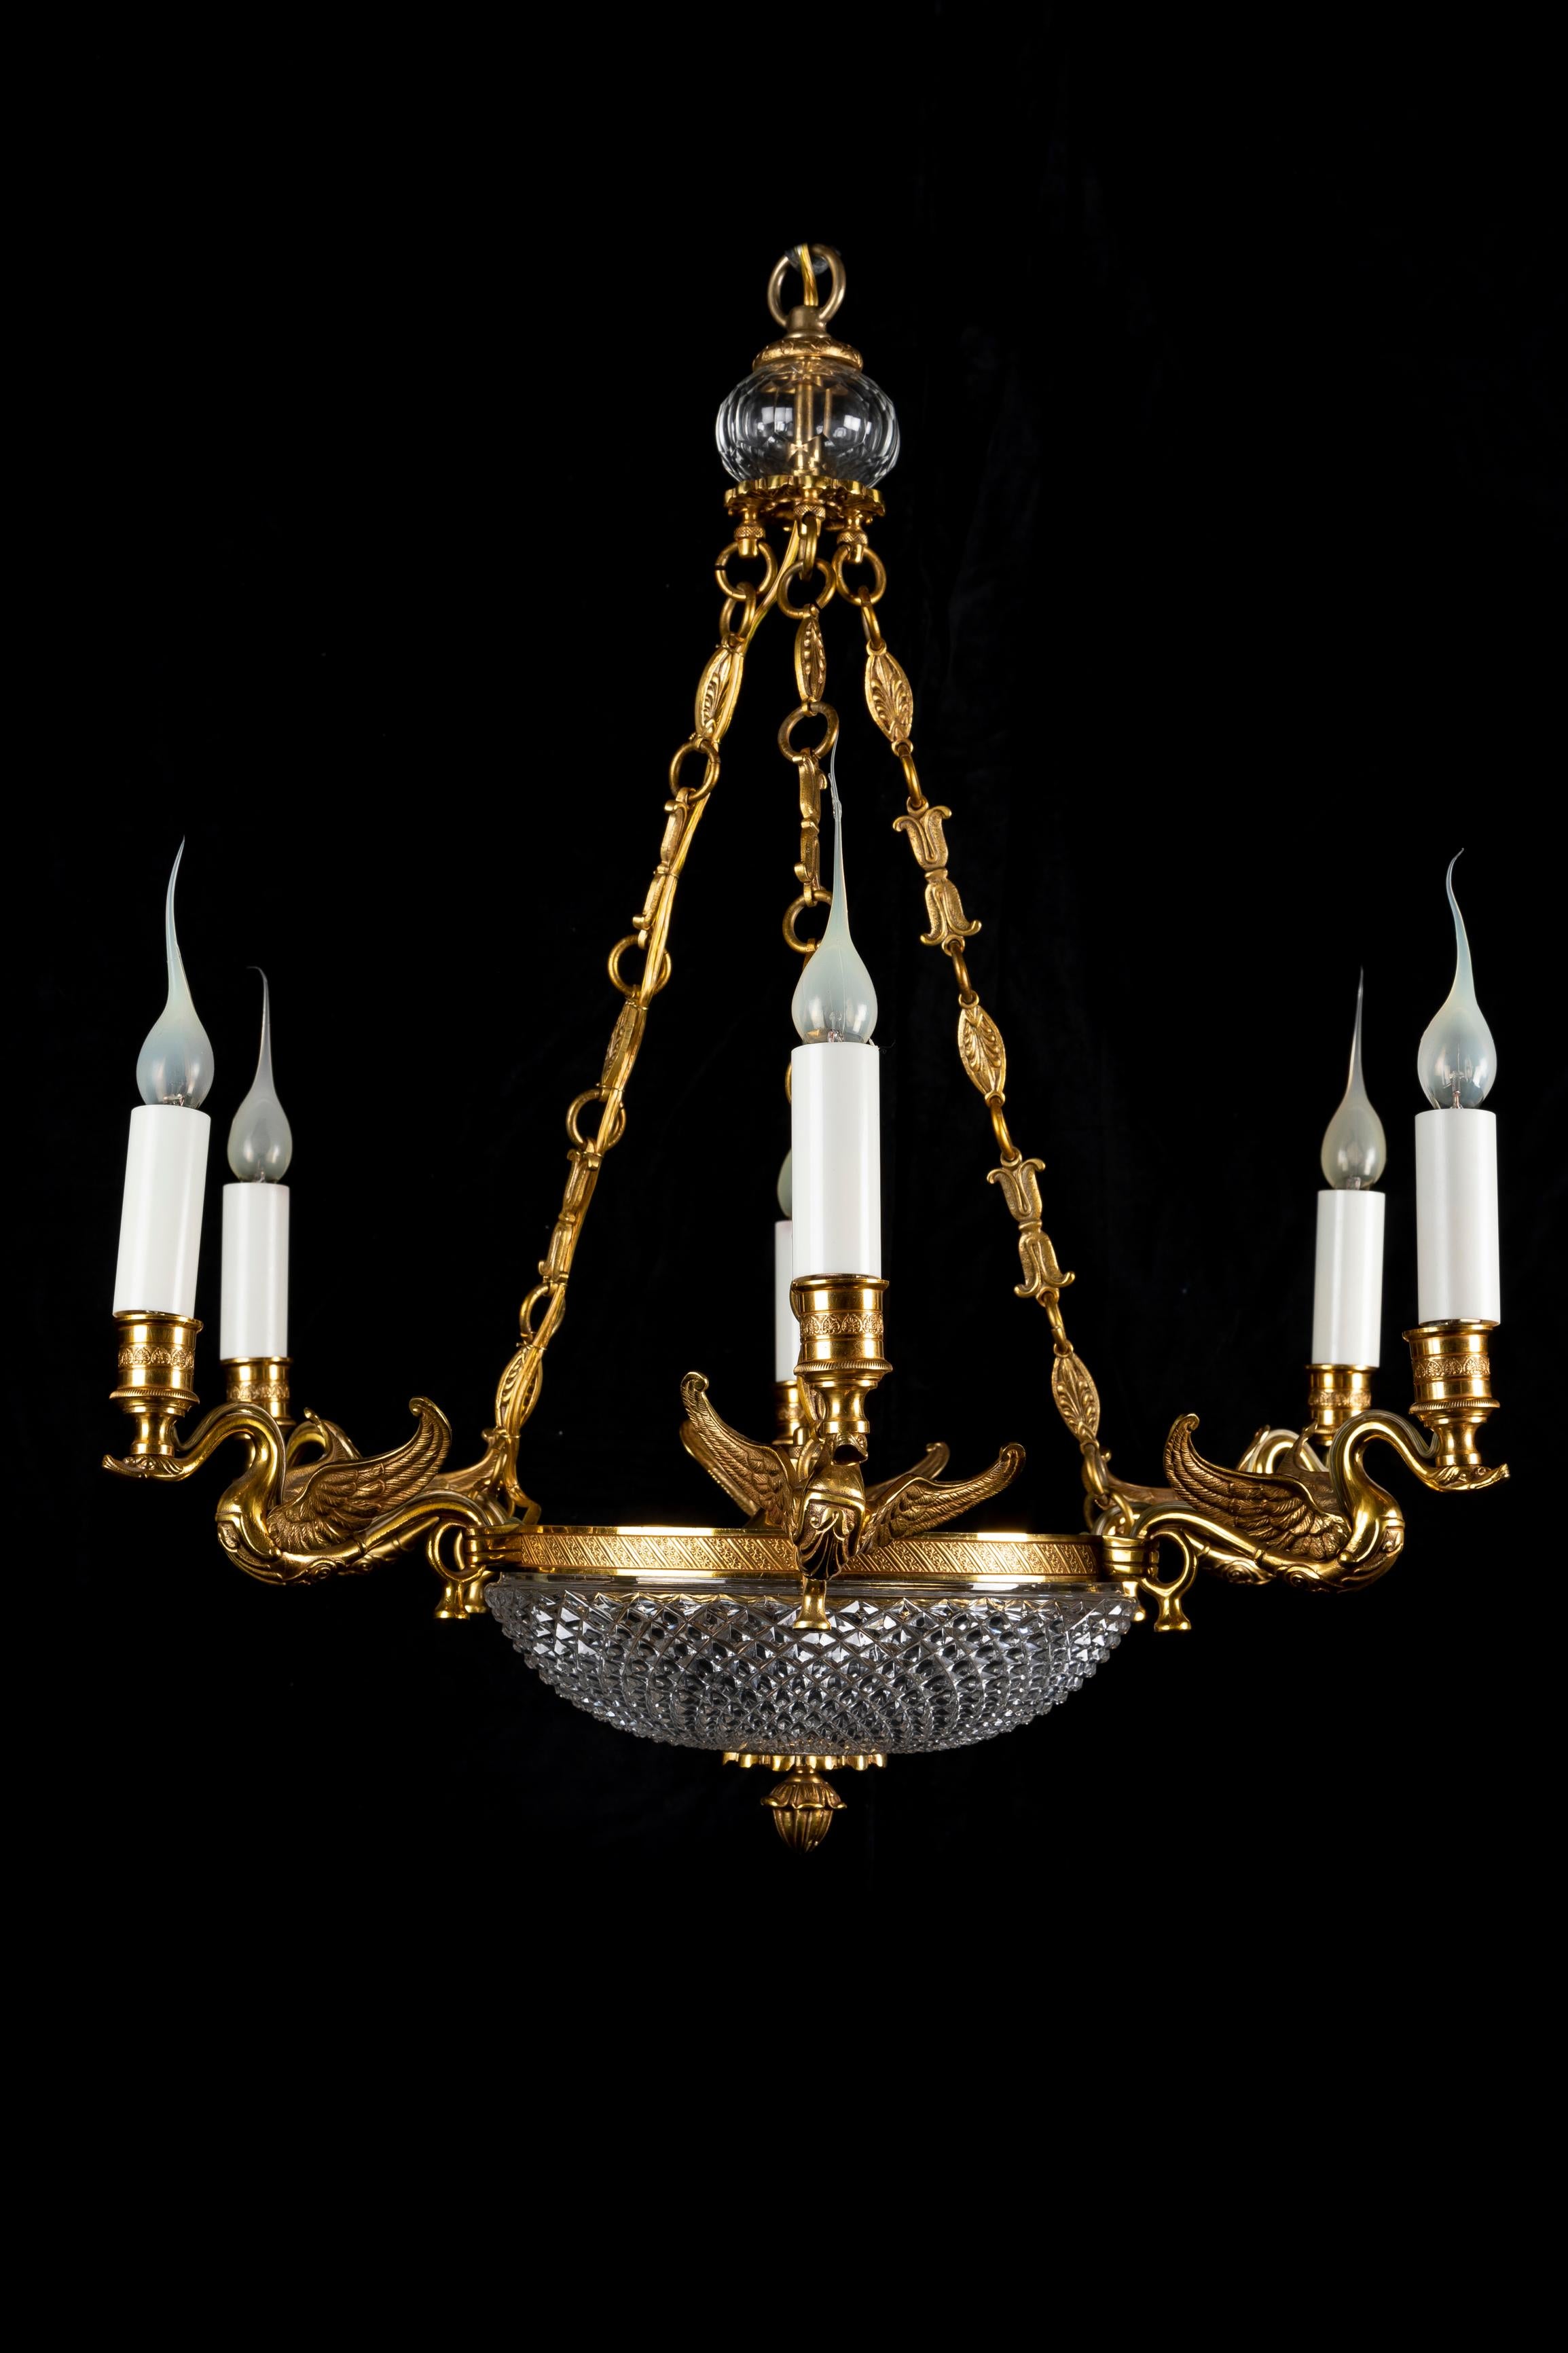 A FIne French Empire Style gilt bronze and cut crystal multi light swan chandelier. This exquisite chandelier is embellished with six beautiful gilt bronze swans, a round cut crystal dish and further adorned with gilt bronze chains connected to the